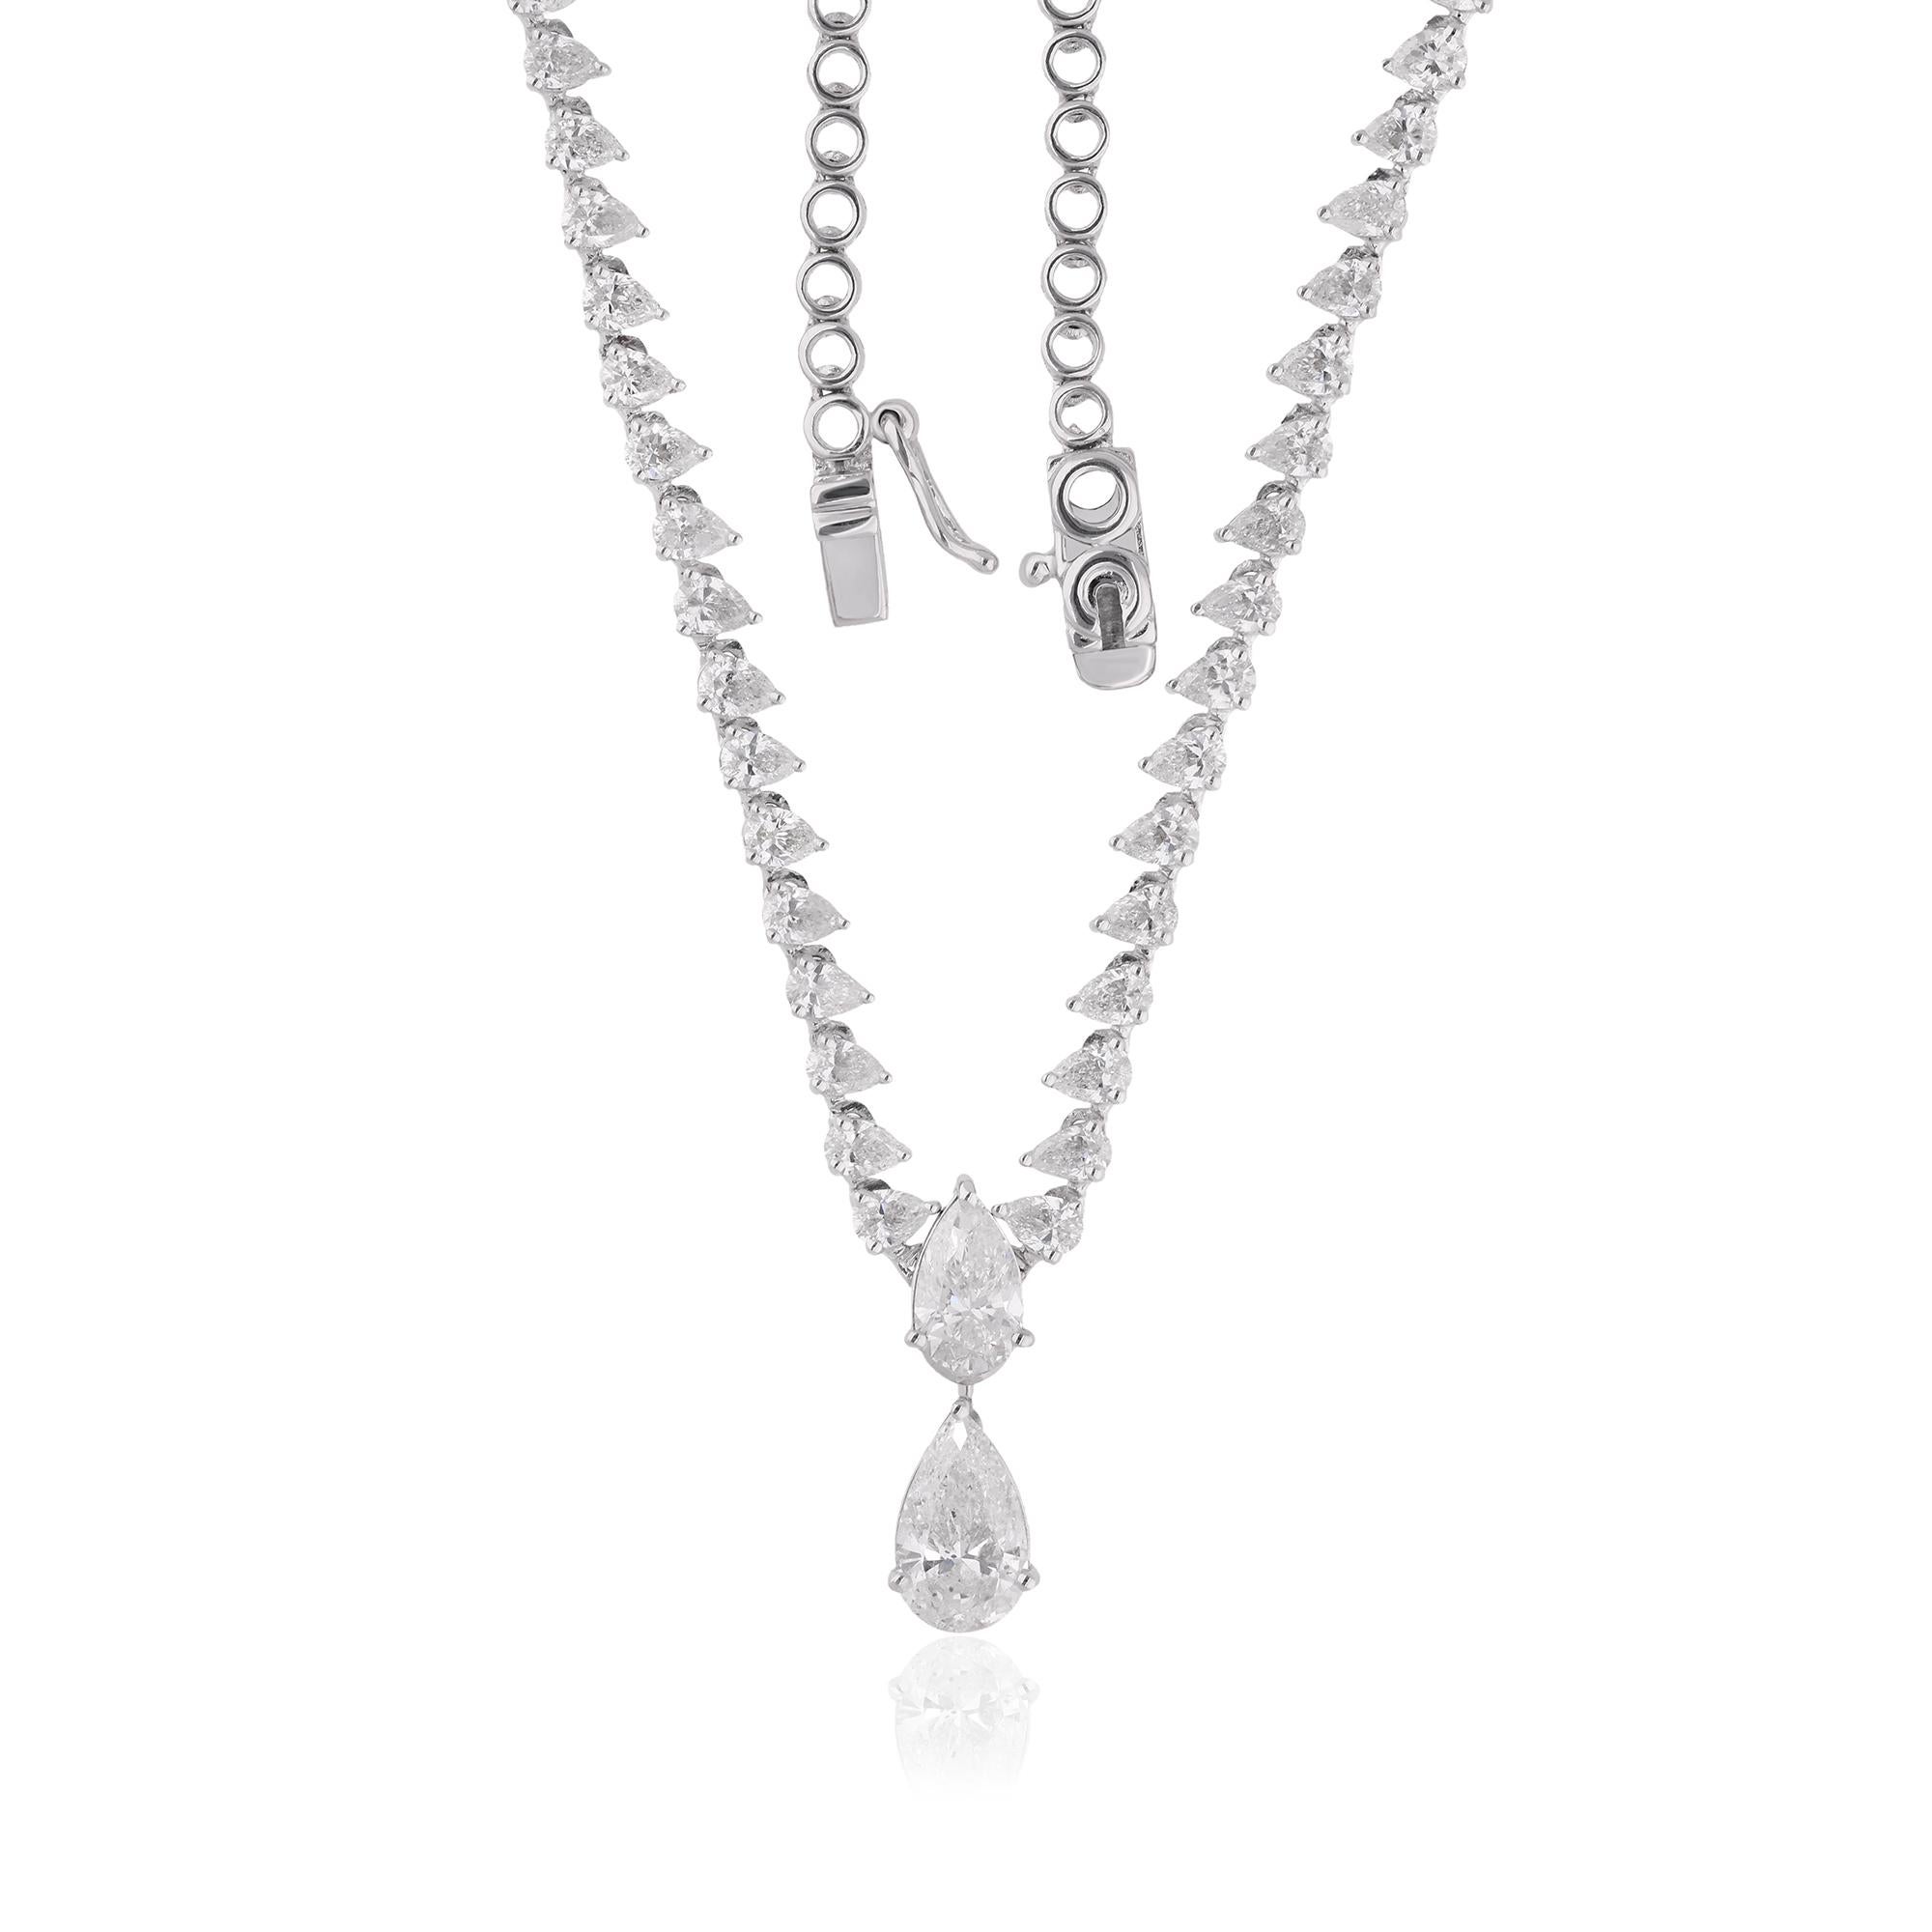 The pear-shaped diamond is delicately suspended from a sleek white gold chain, adding a touch of modernity and refinement to the design. The 14 karat white gold setting provides a luxurious backdrop for the dazzling diamond, enhancing its brilliance